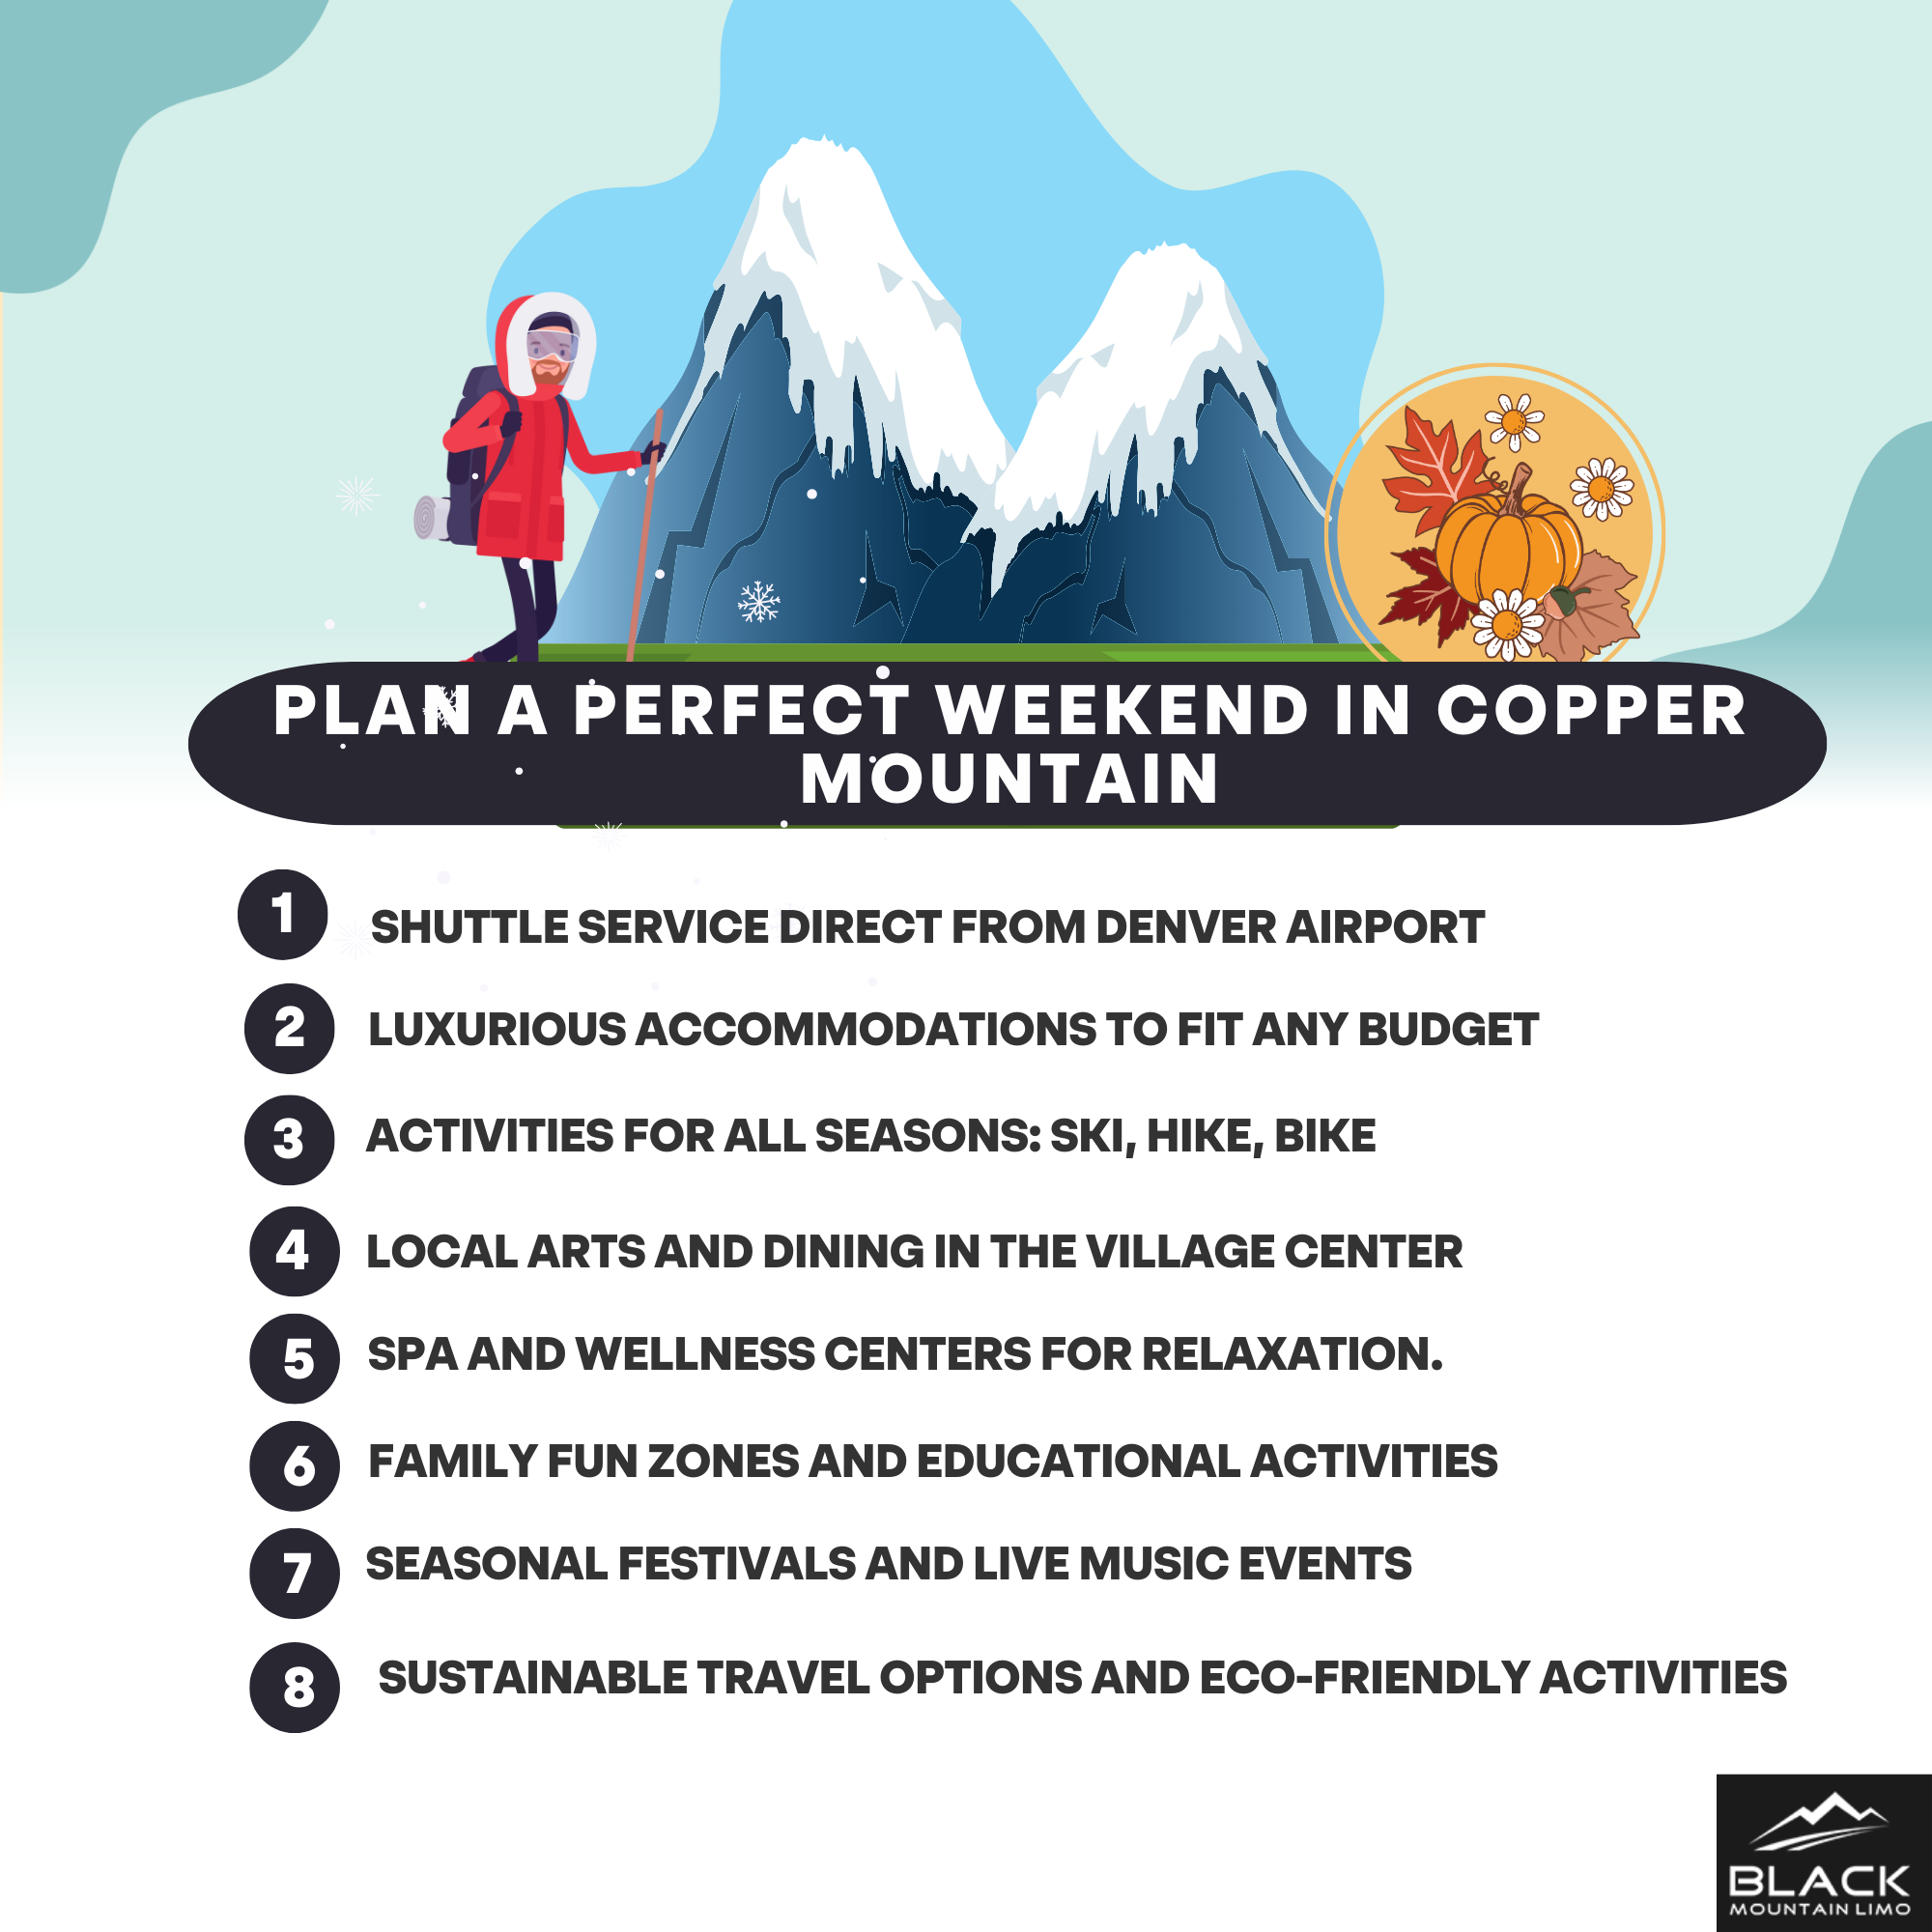 Plan a Perfect Weekend in Copper Mountain